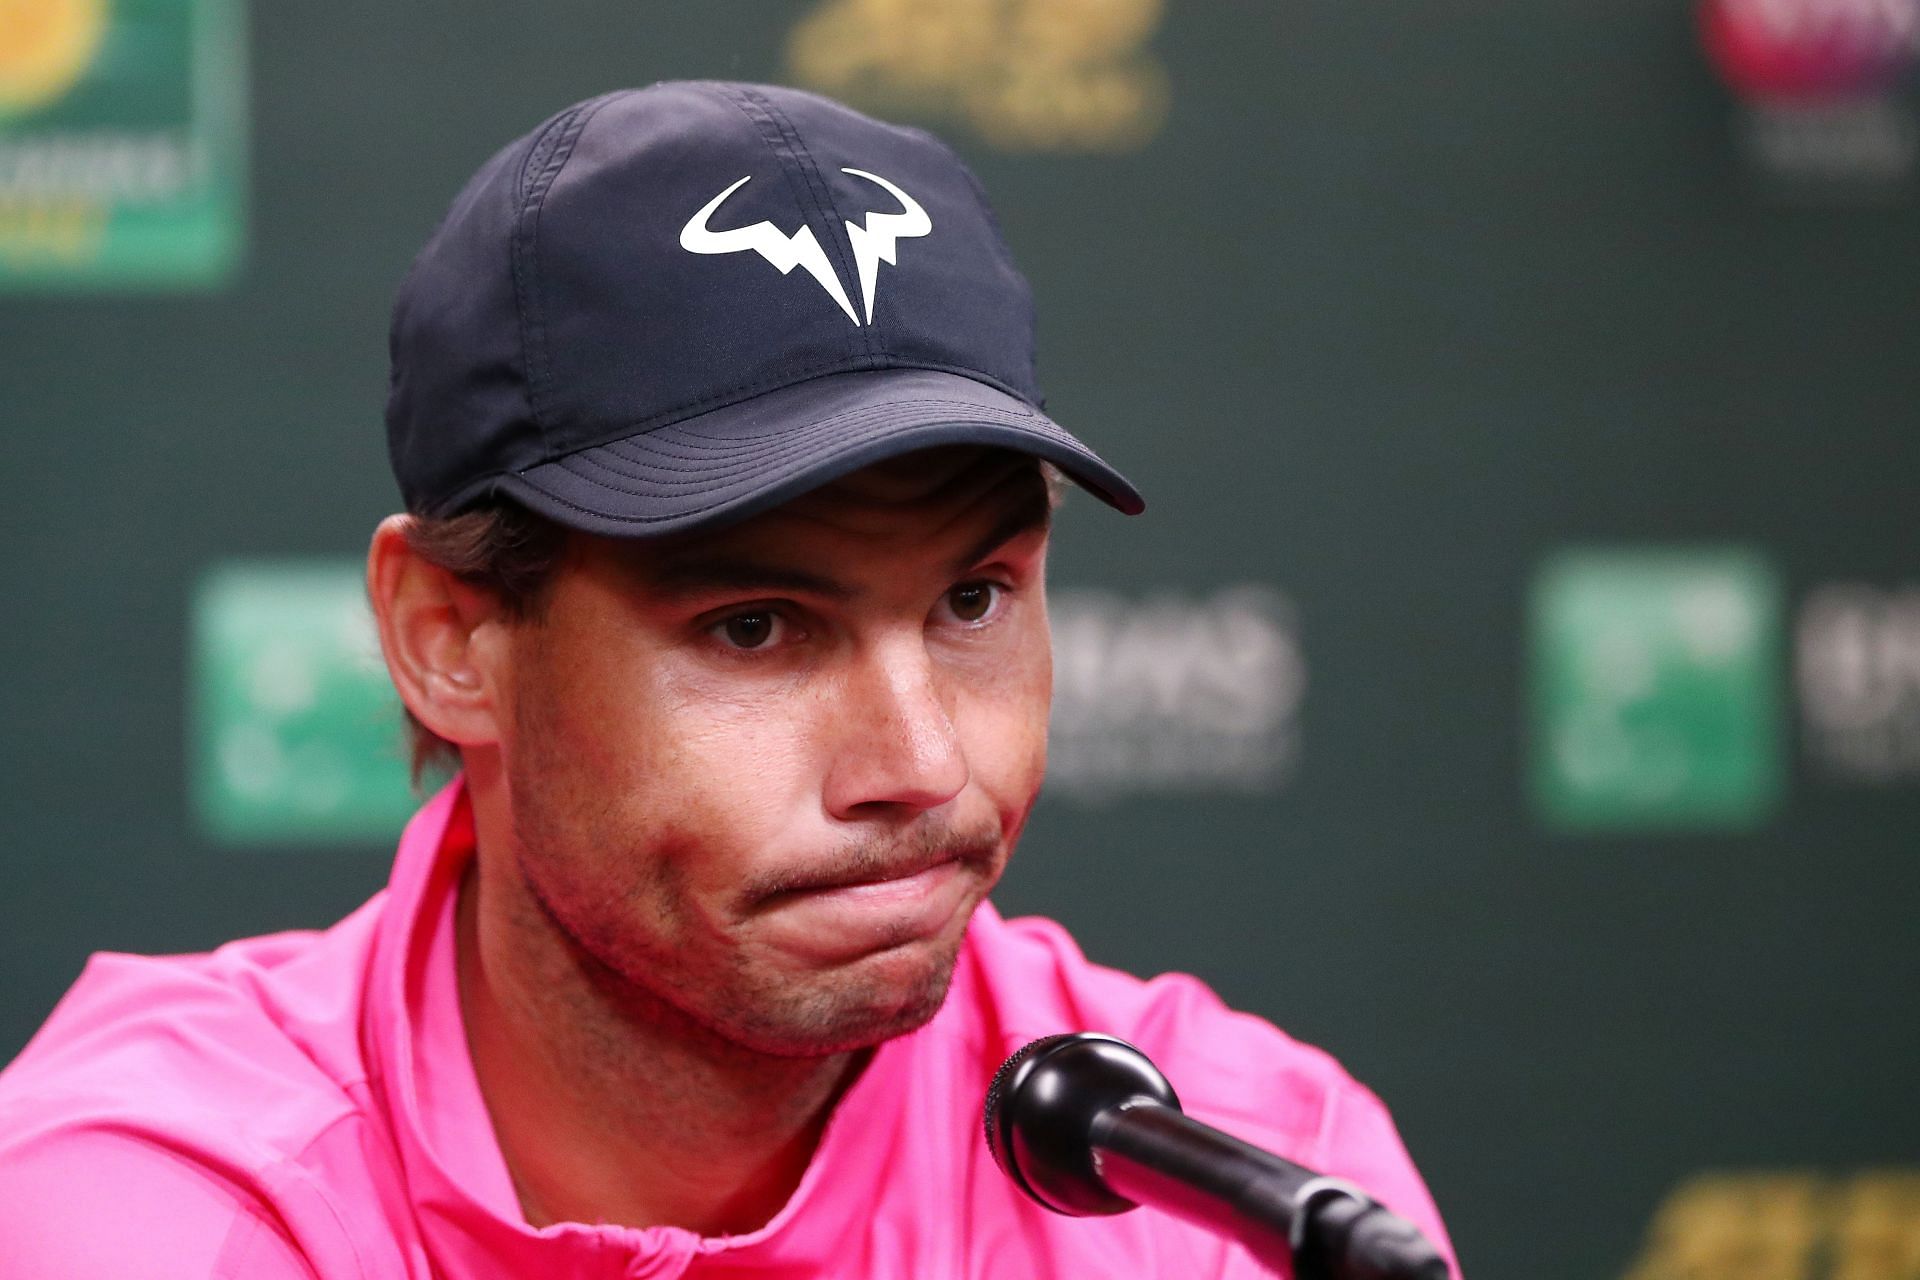 Rafael Nadal has been suffering from a chroc foot injury.